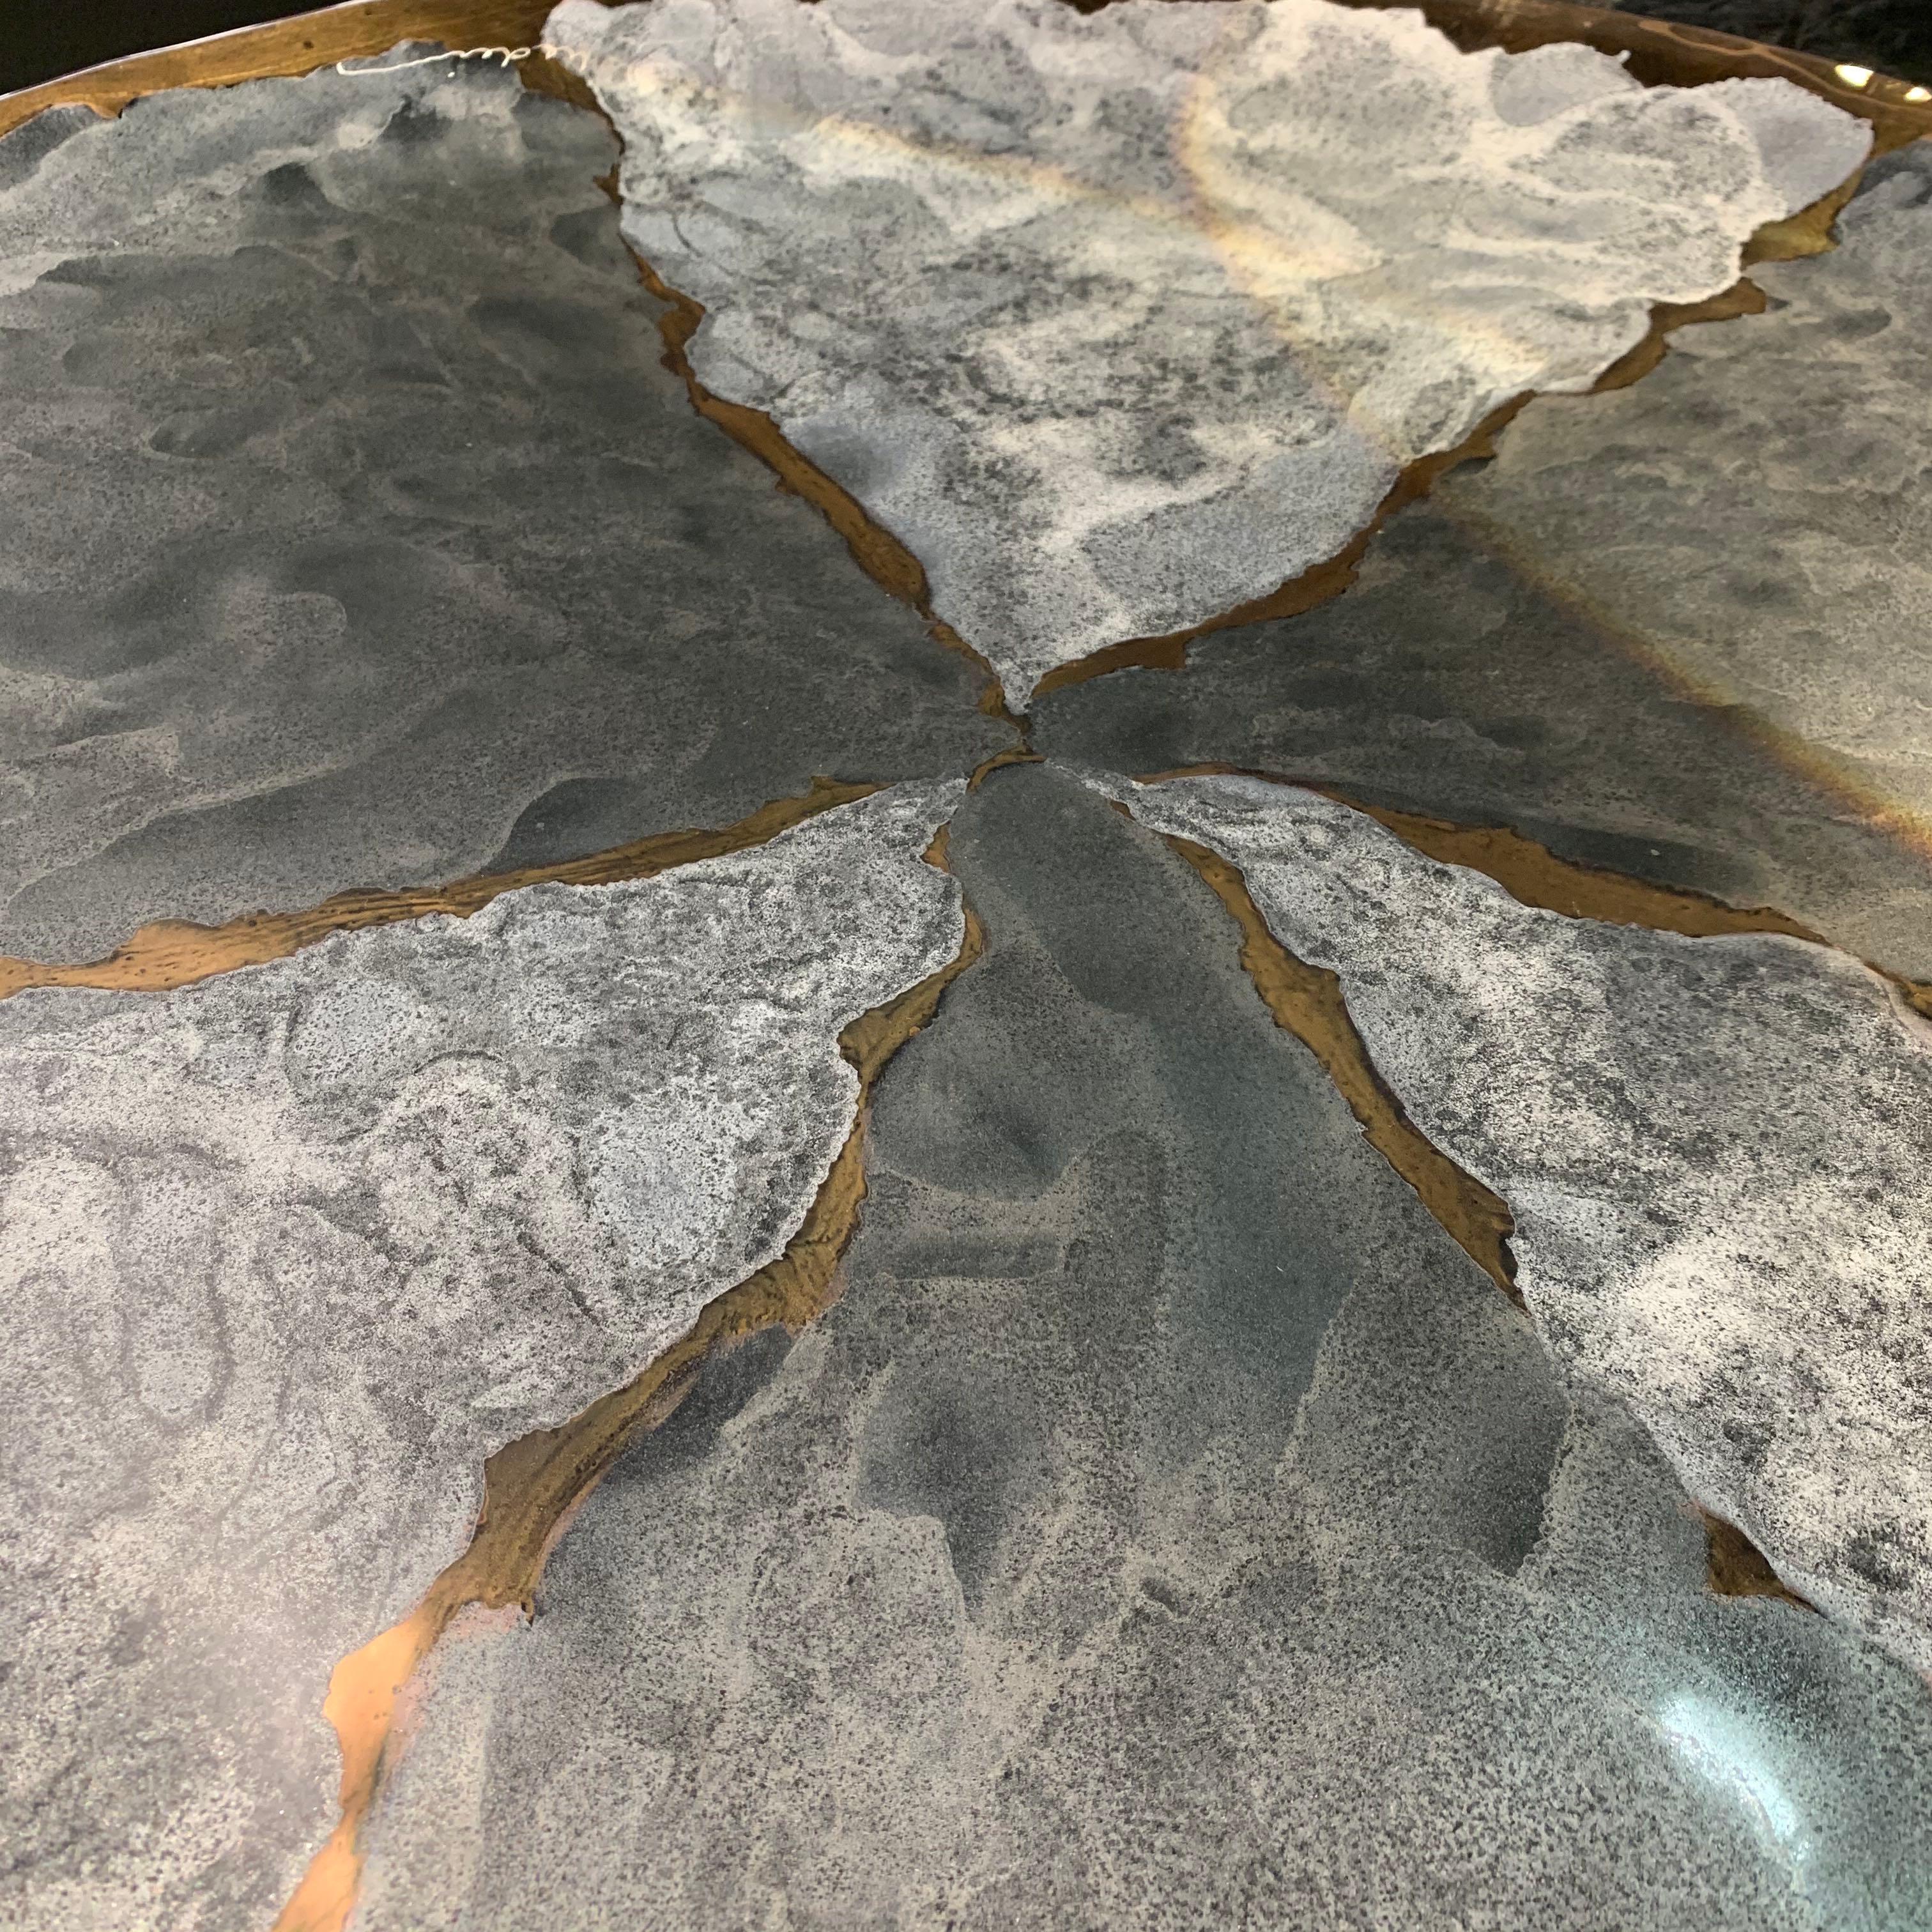 Brazilian handcrafted extra large round glass platter
Triangular shaped decorative pattern
Mica and charcoal grey color with 24-karat gold accents.
ARRIVAL TBD
  